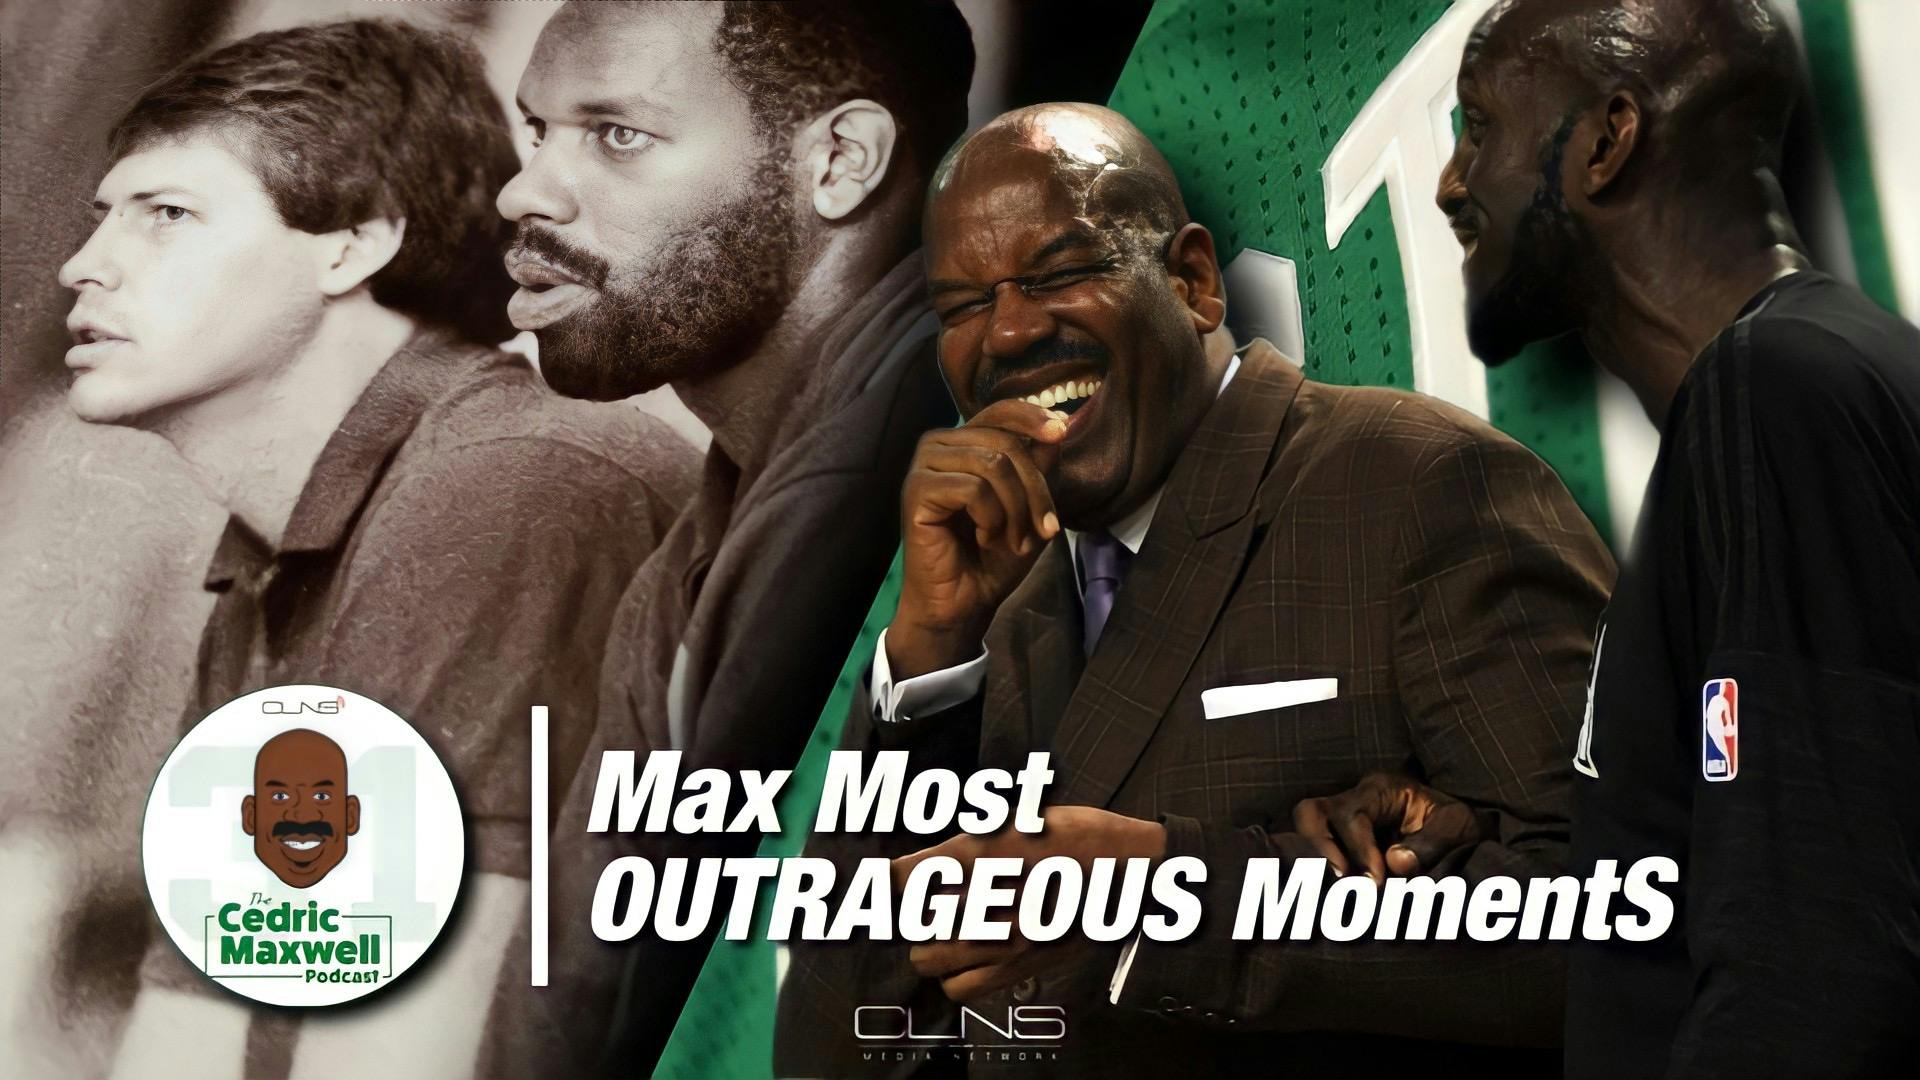 Max Most Hilarious Moments: Cornbread’s Greatest Stories (lol)